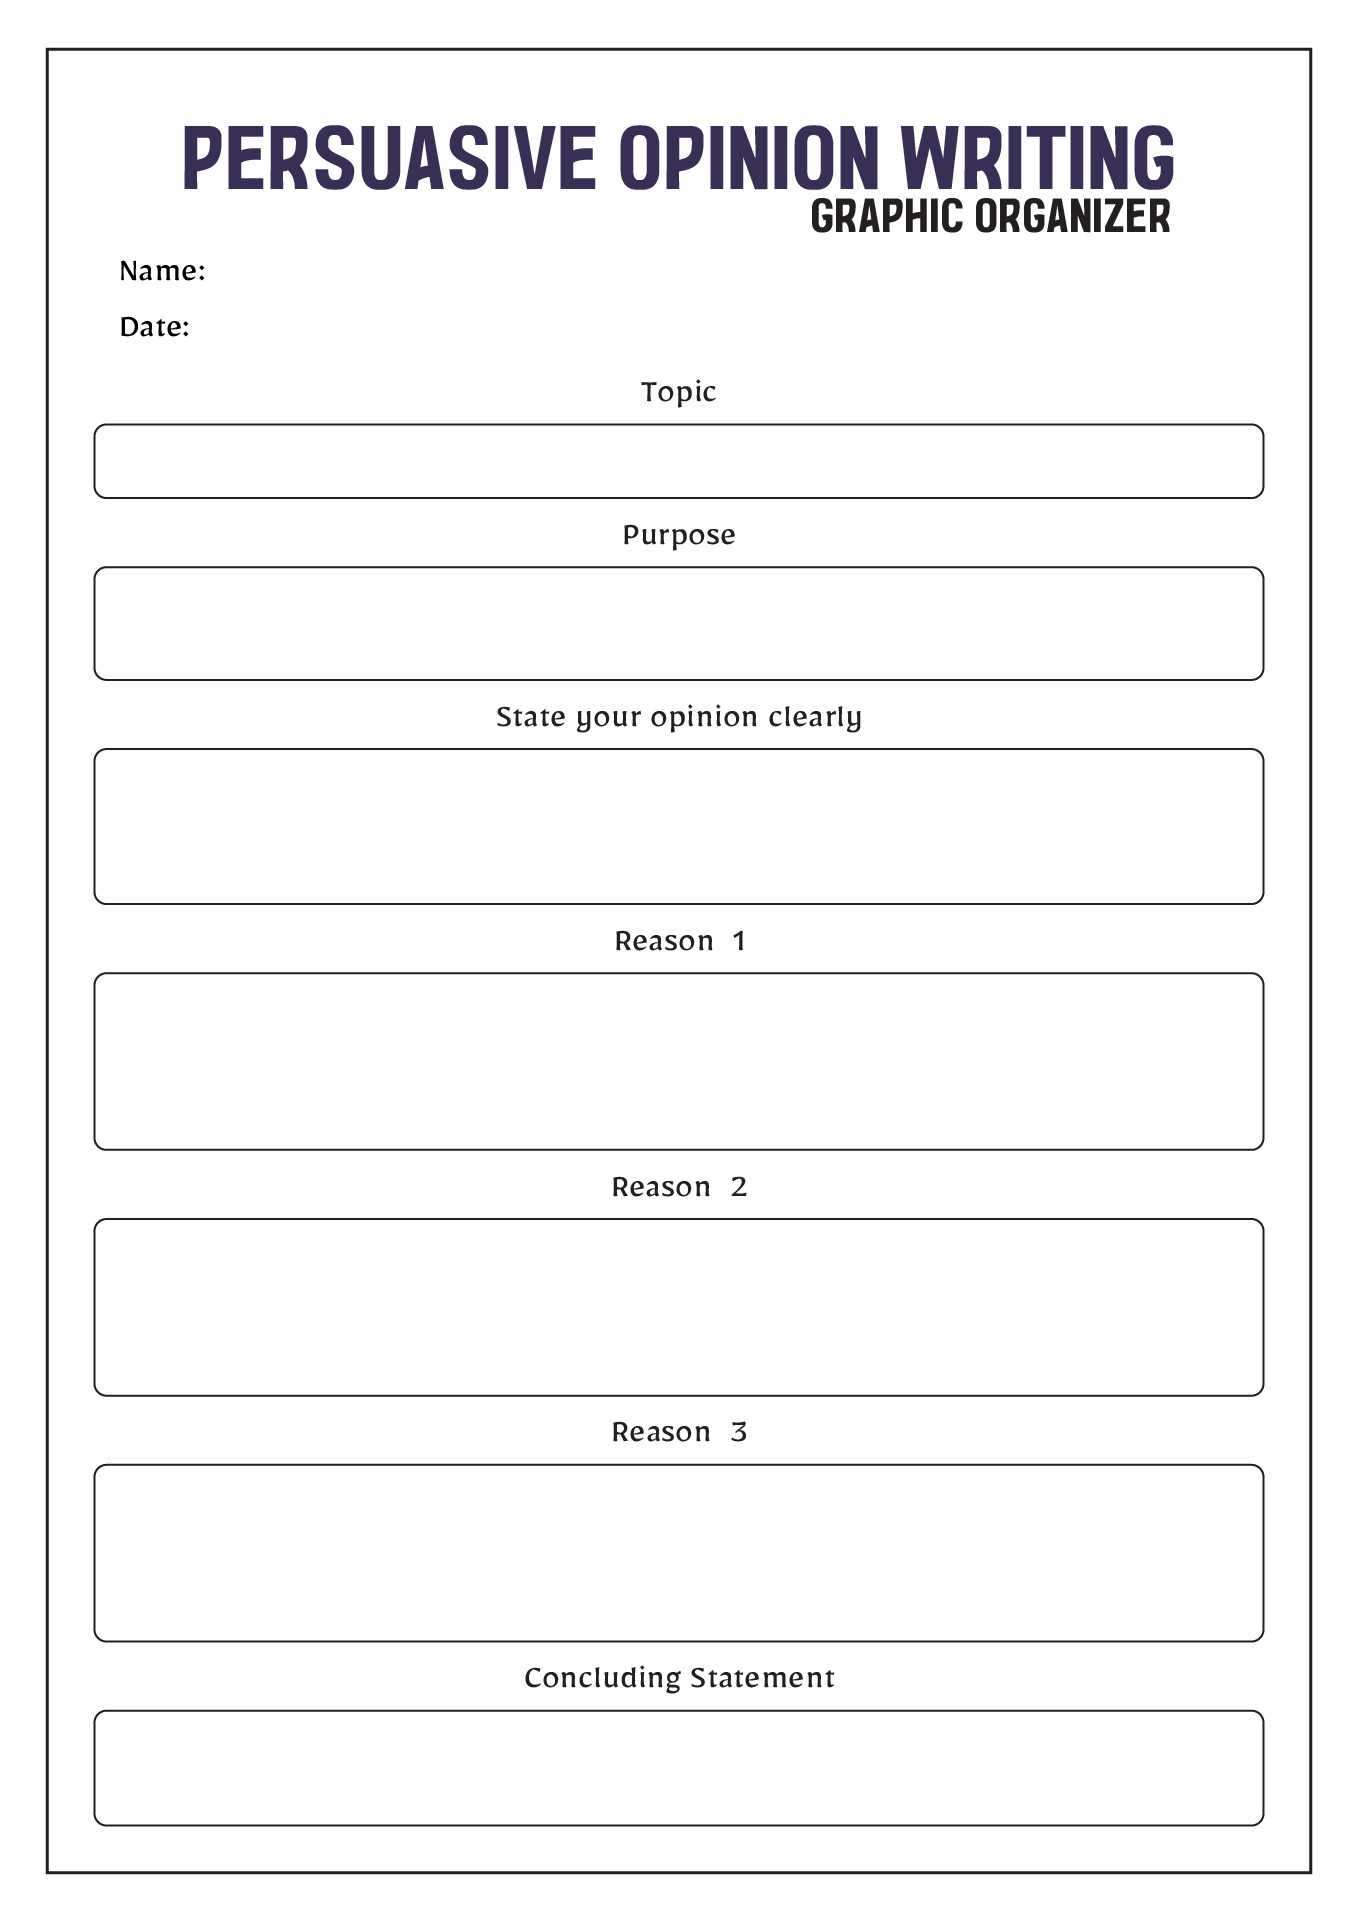 16-best-images-of-high-school-graphic-organizer-worksheets-character-analysis-graphic